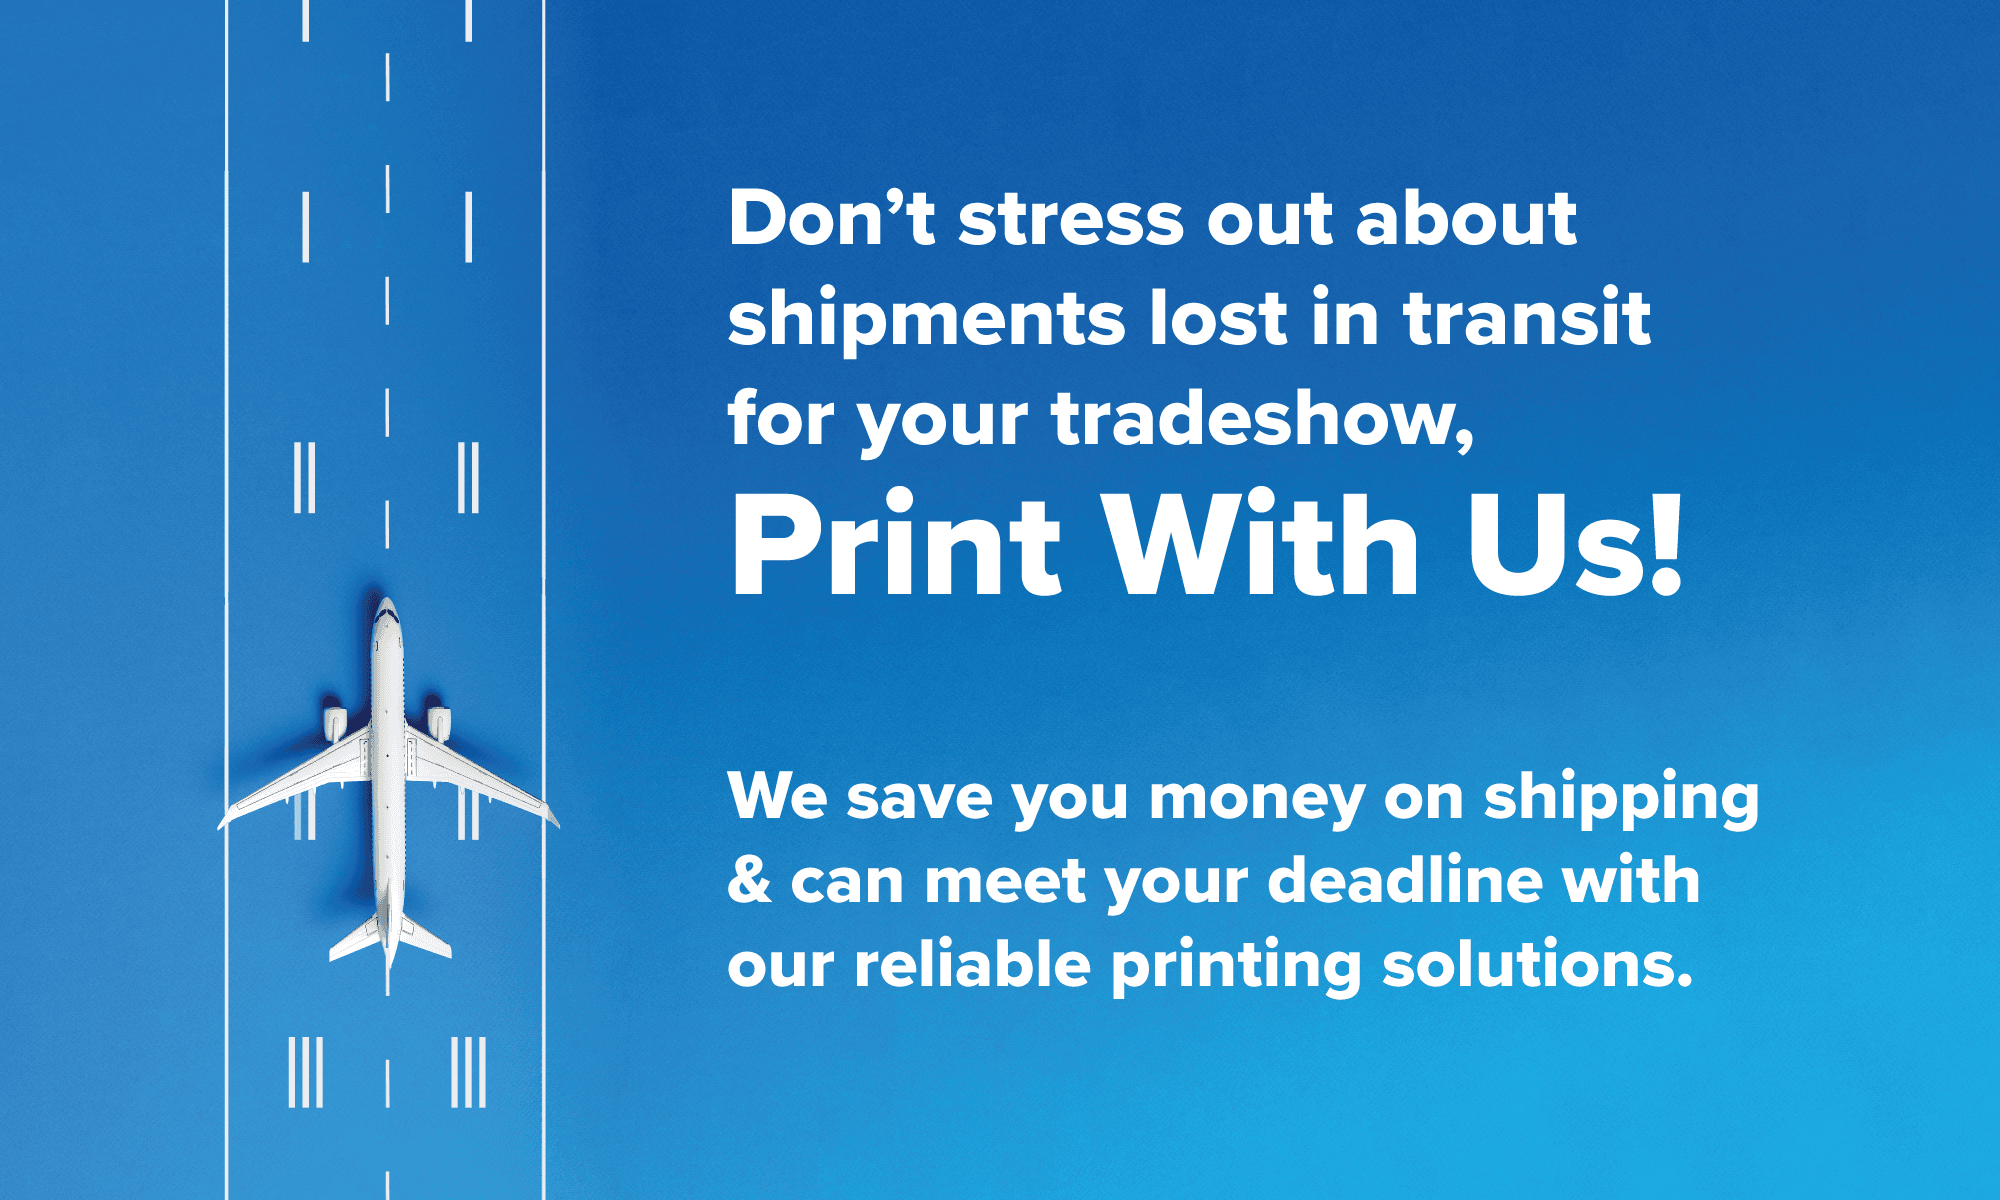 Don’t stress out about shipments lost in transit for your tradeshow, Print With Us!We save you money on shipping& can meet your deadline with our reliable printing solutions.